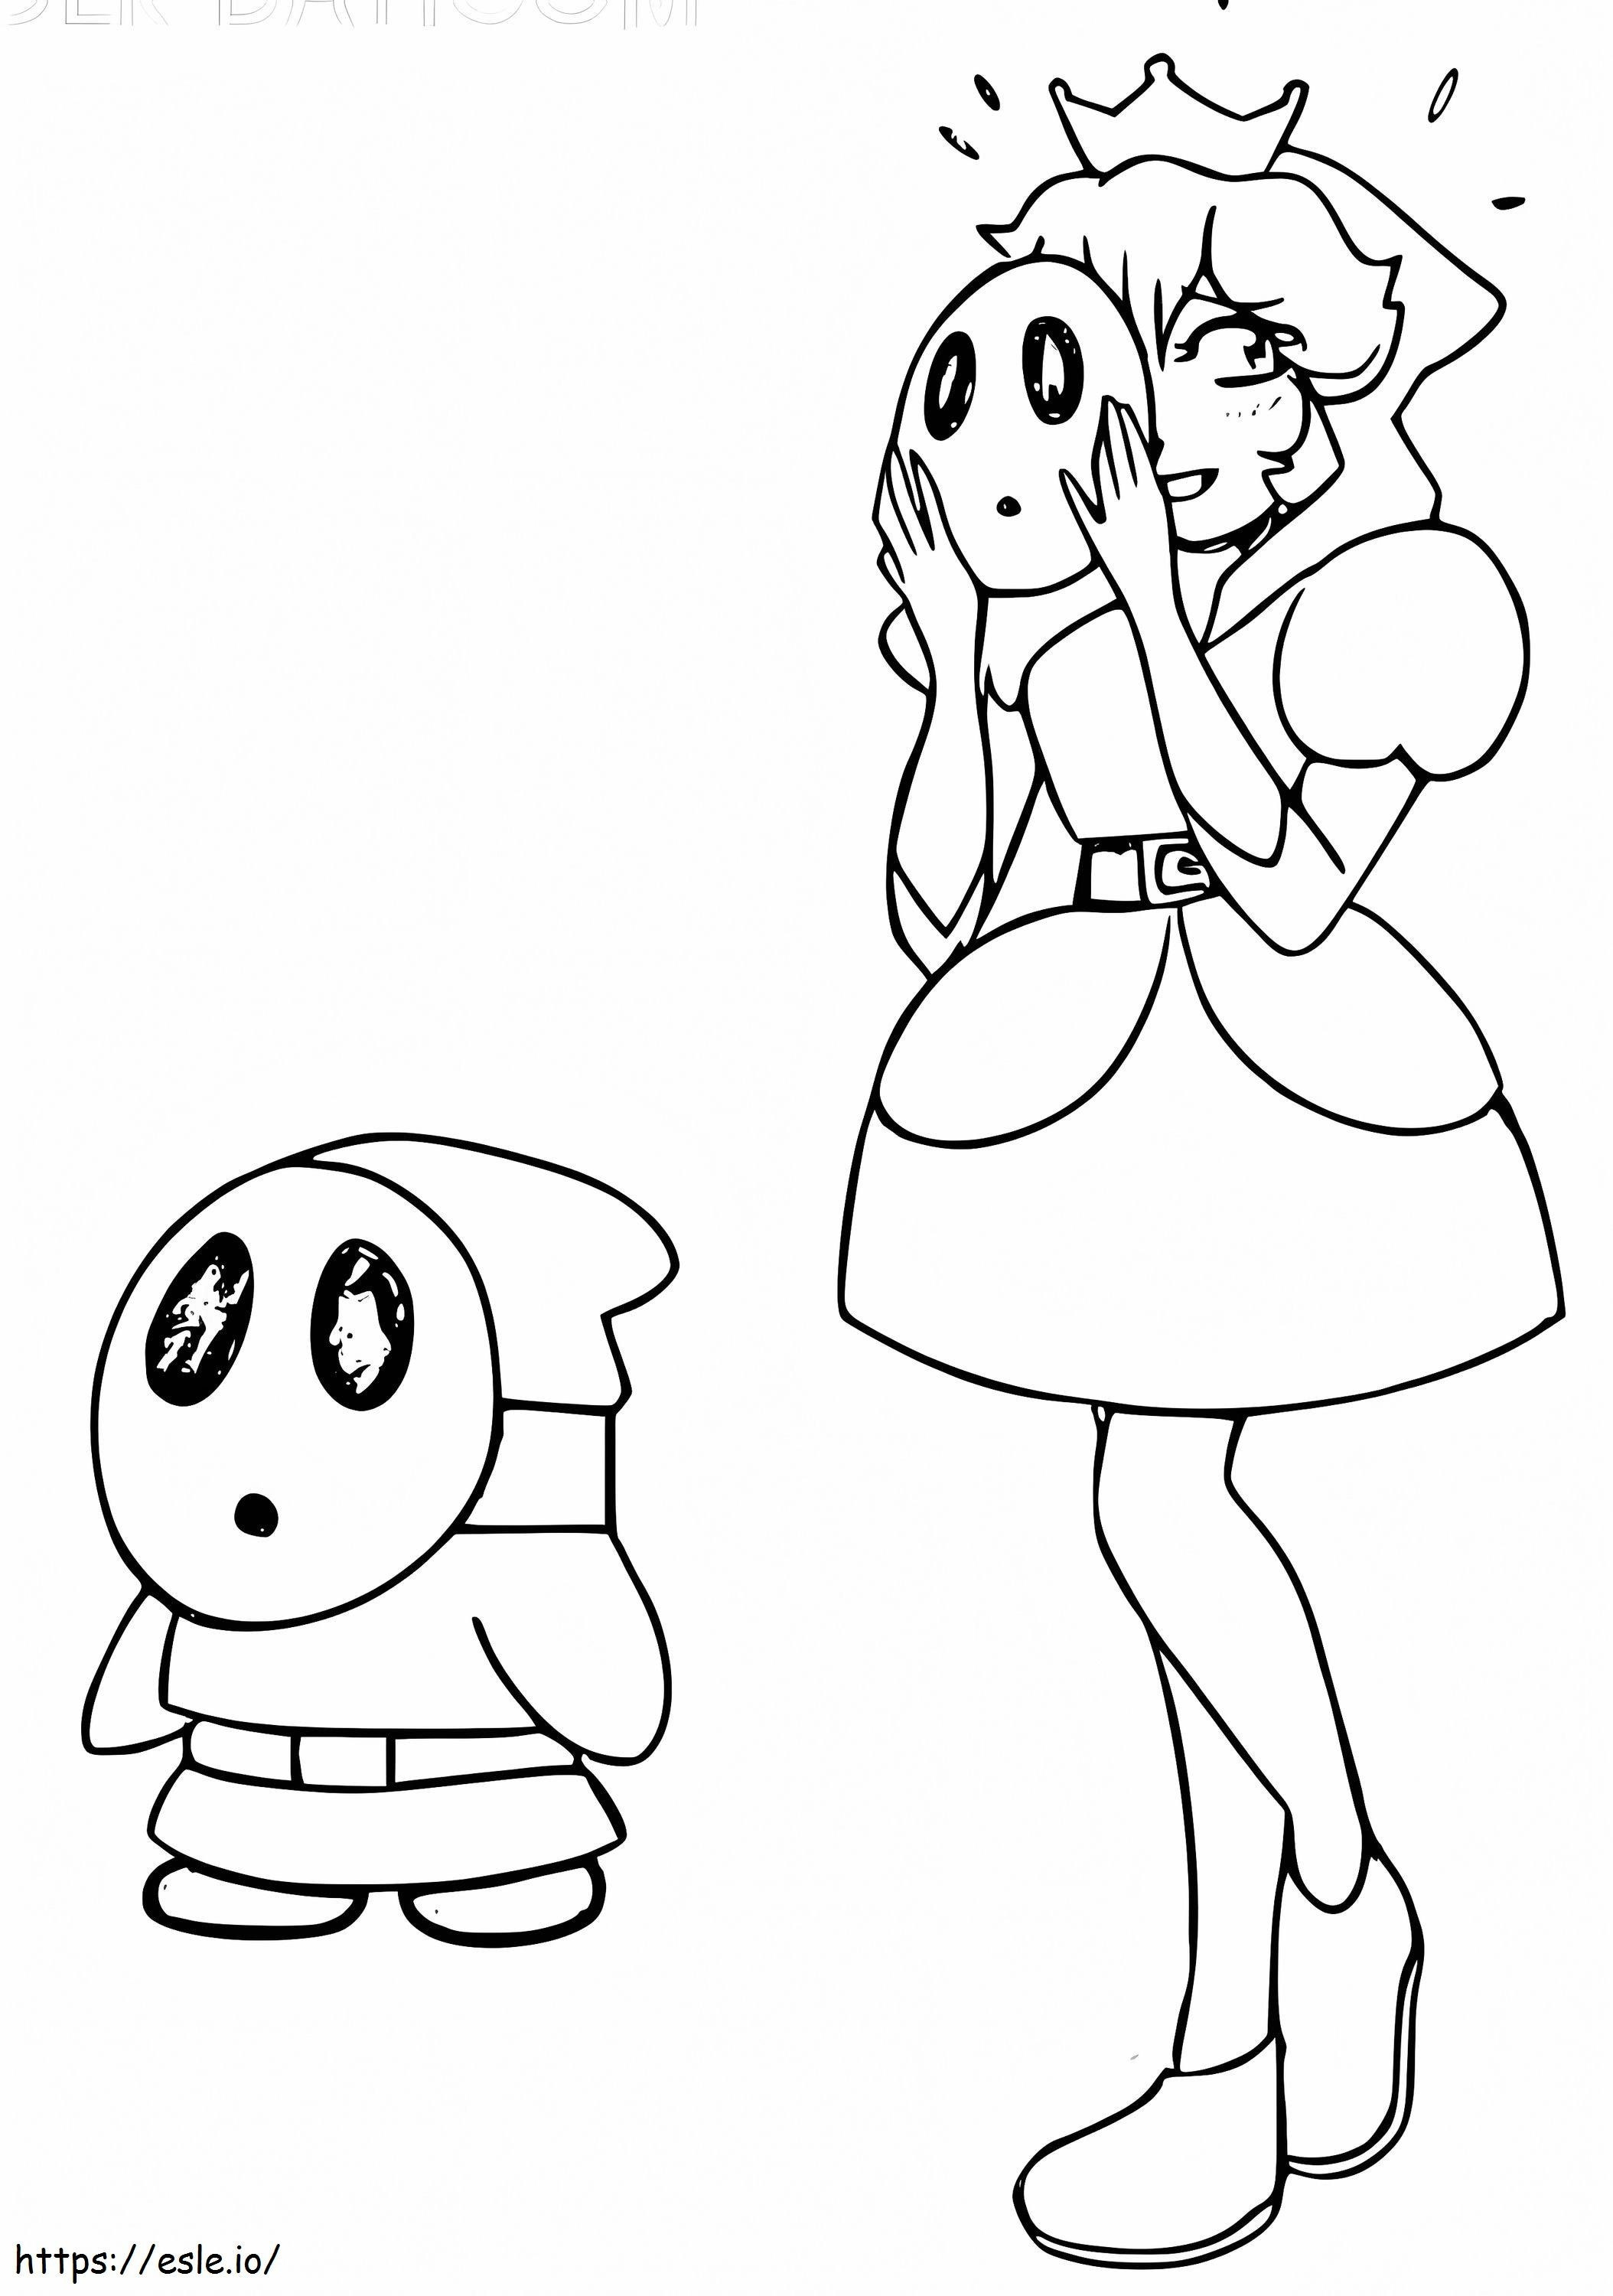 Princess Peach And Shy Guy coloring page